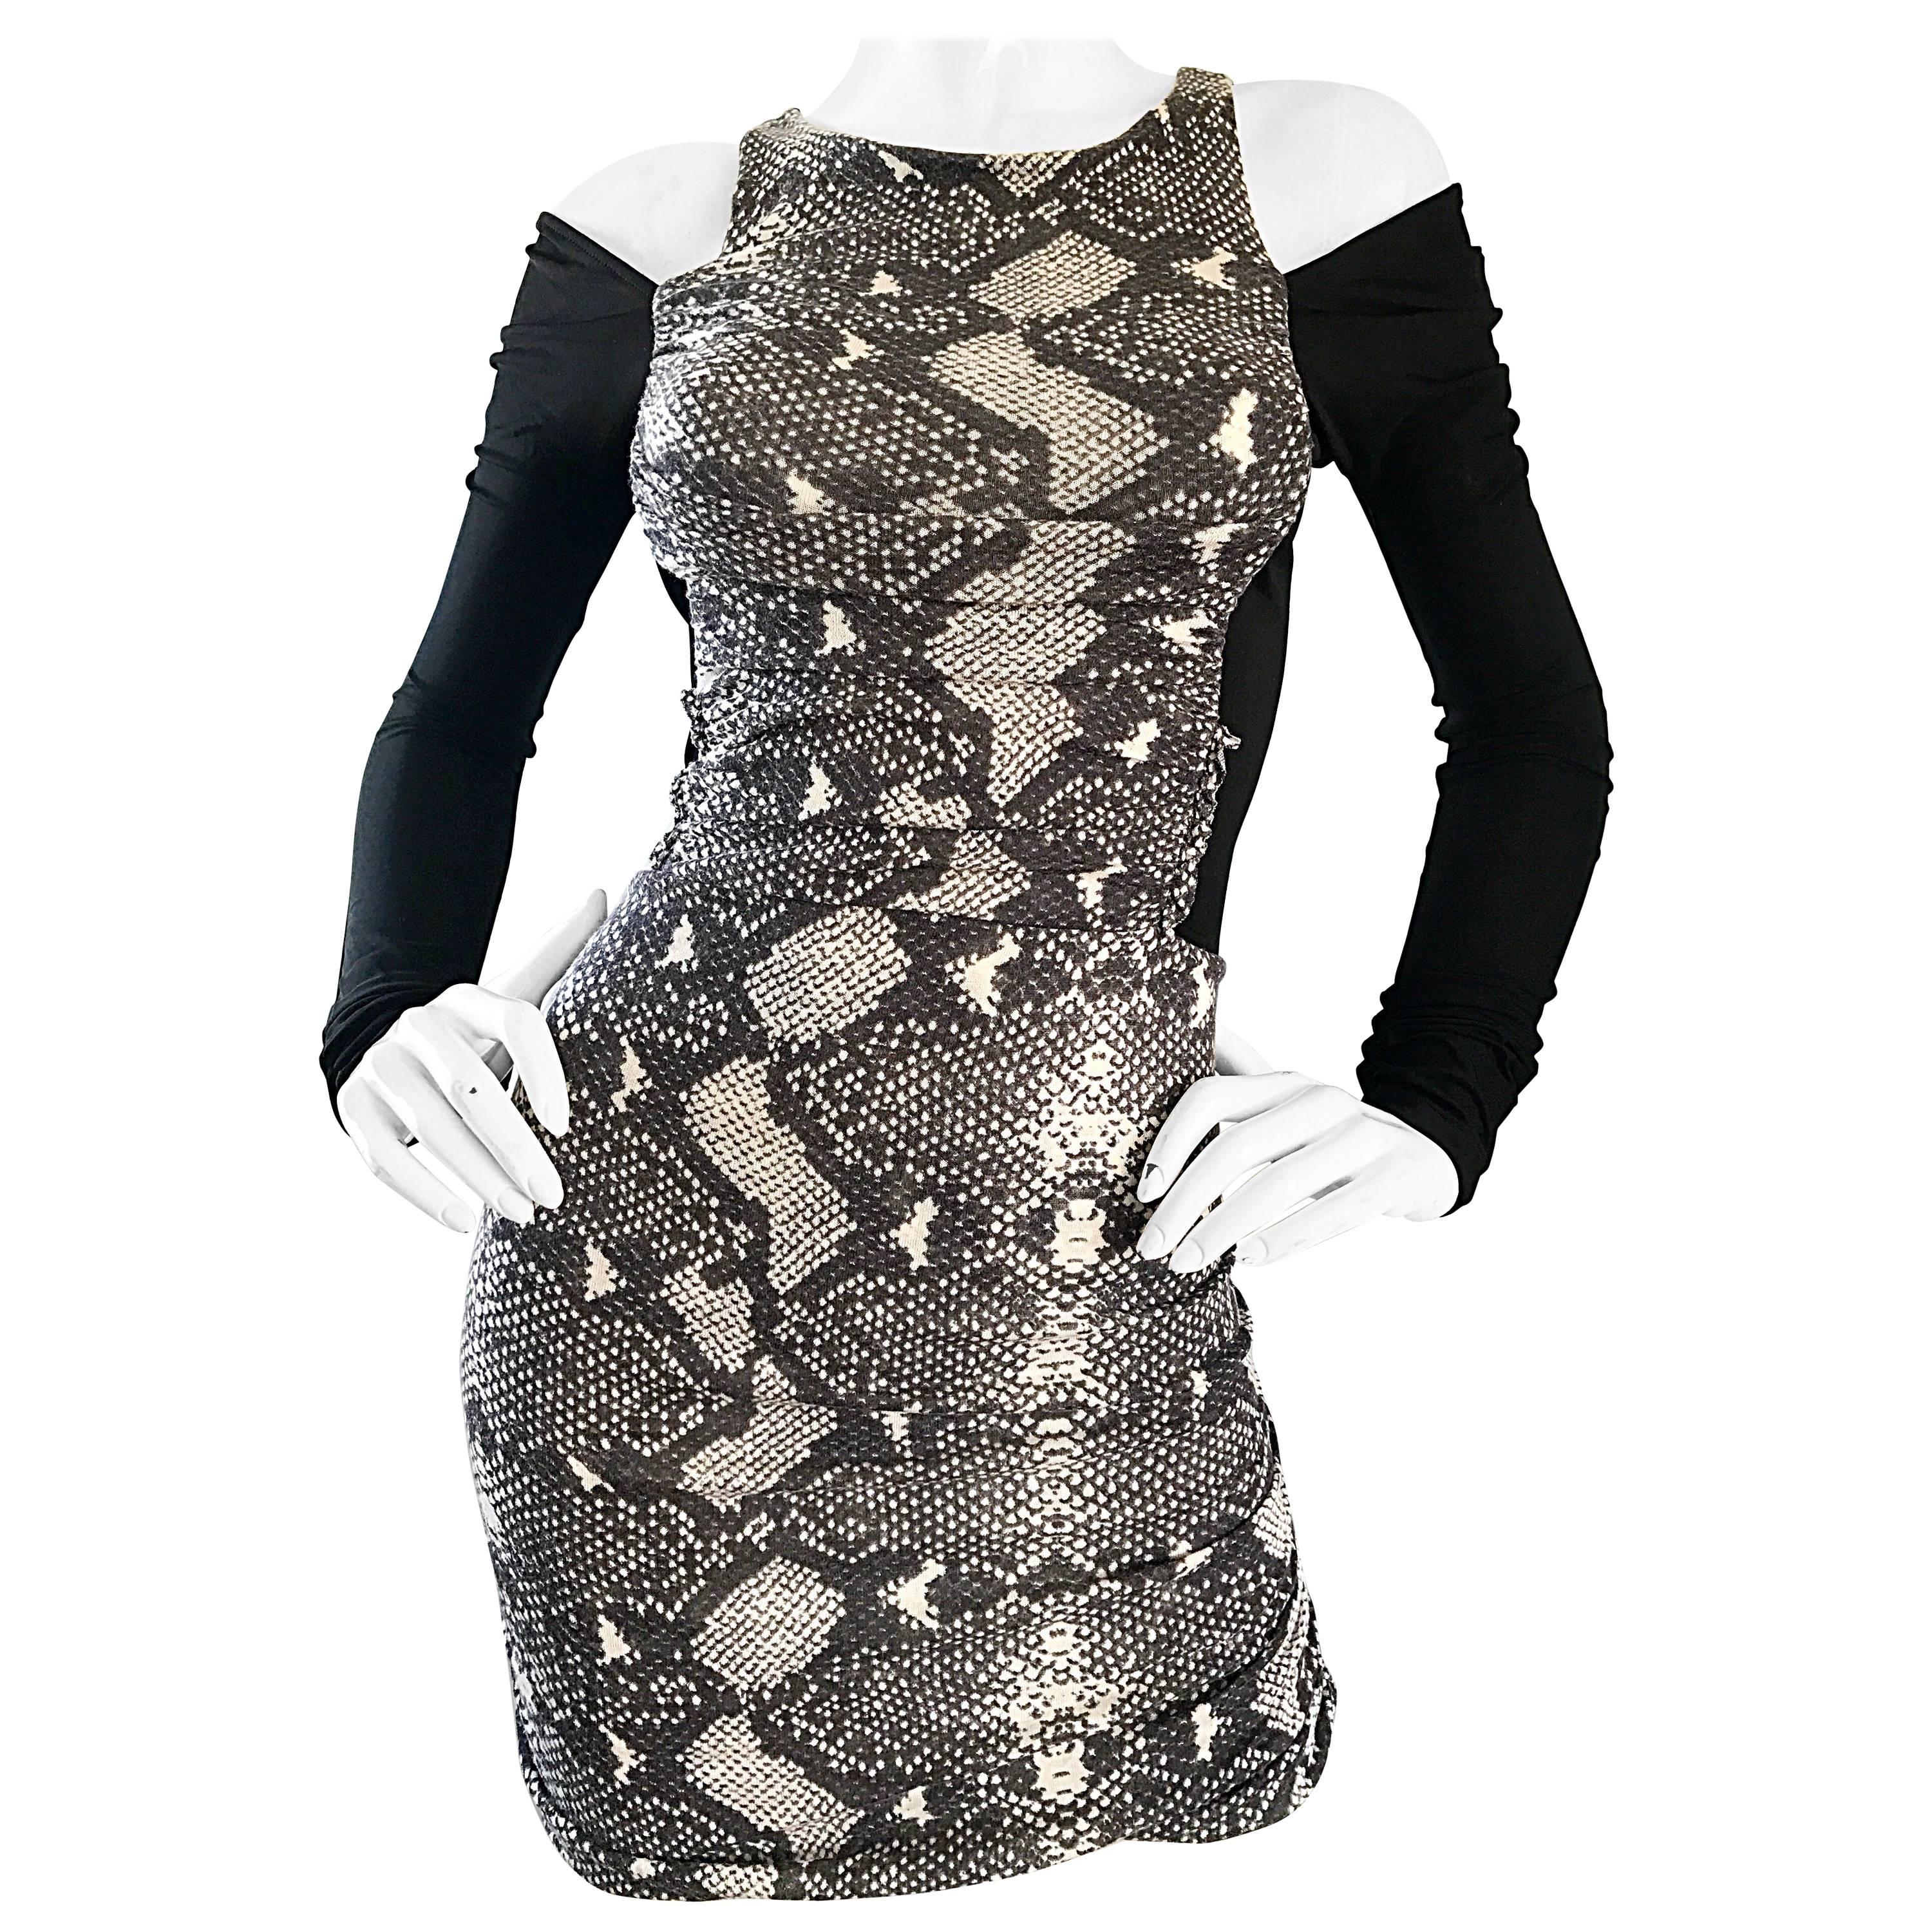 1990s PIERRE BALMAIN Black and White Snakeskin Cold Shoulder Sexy Dress For Sale